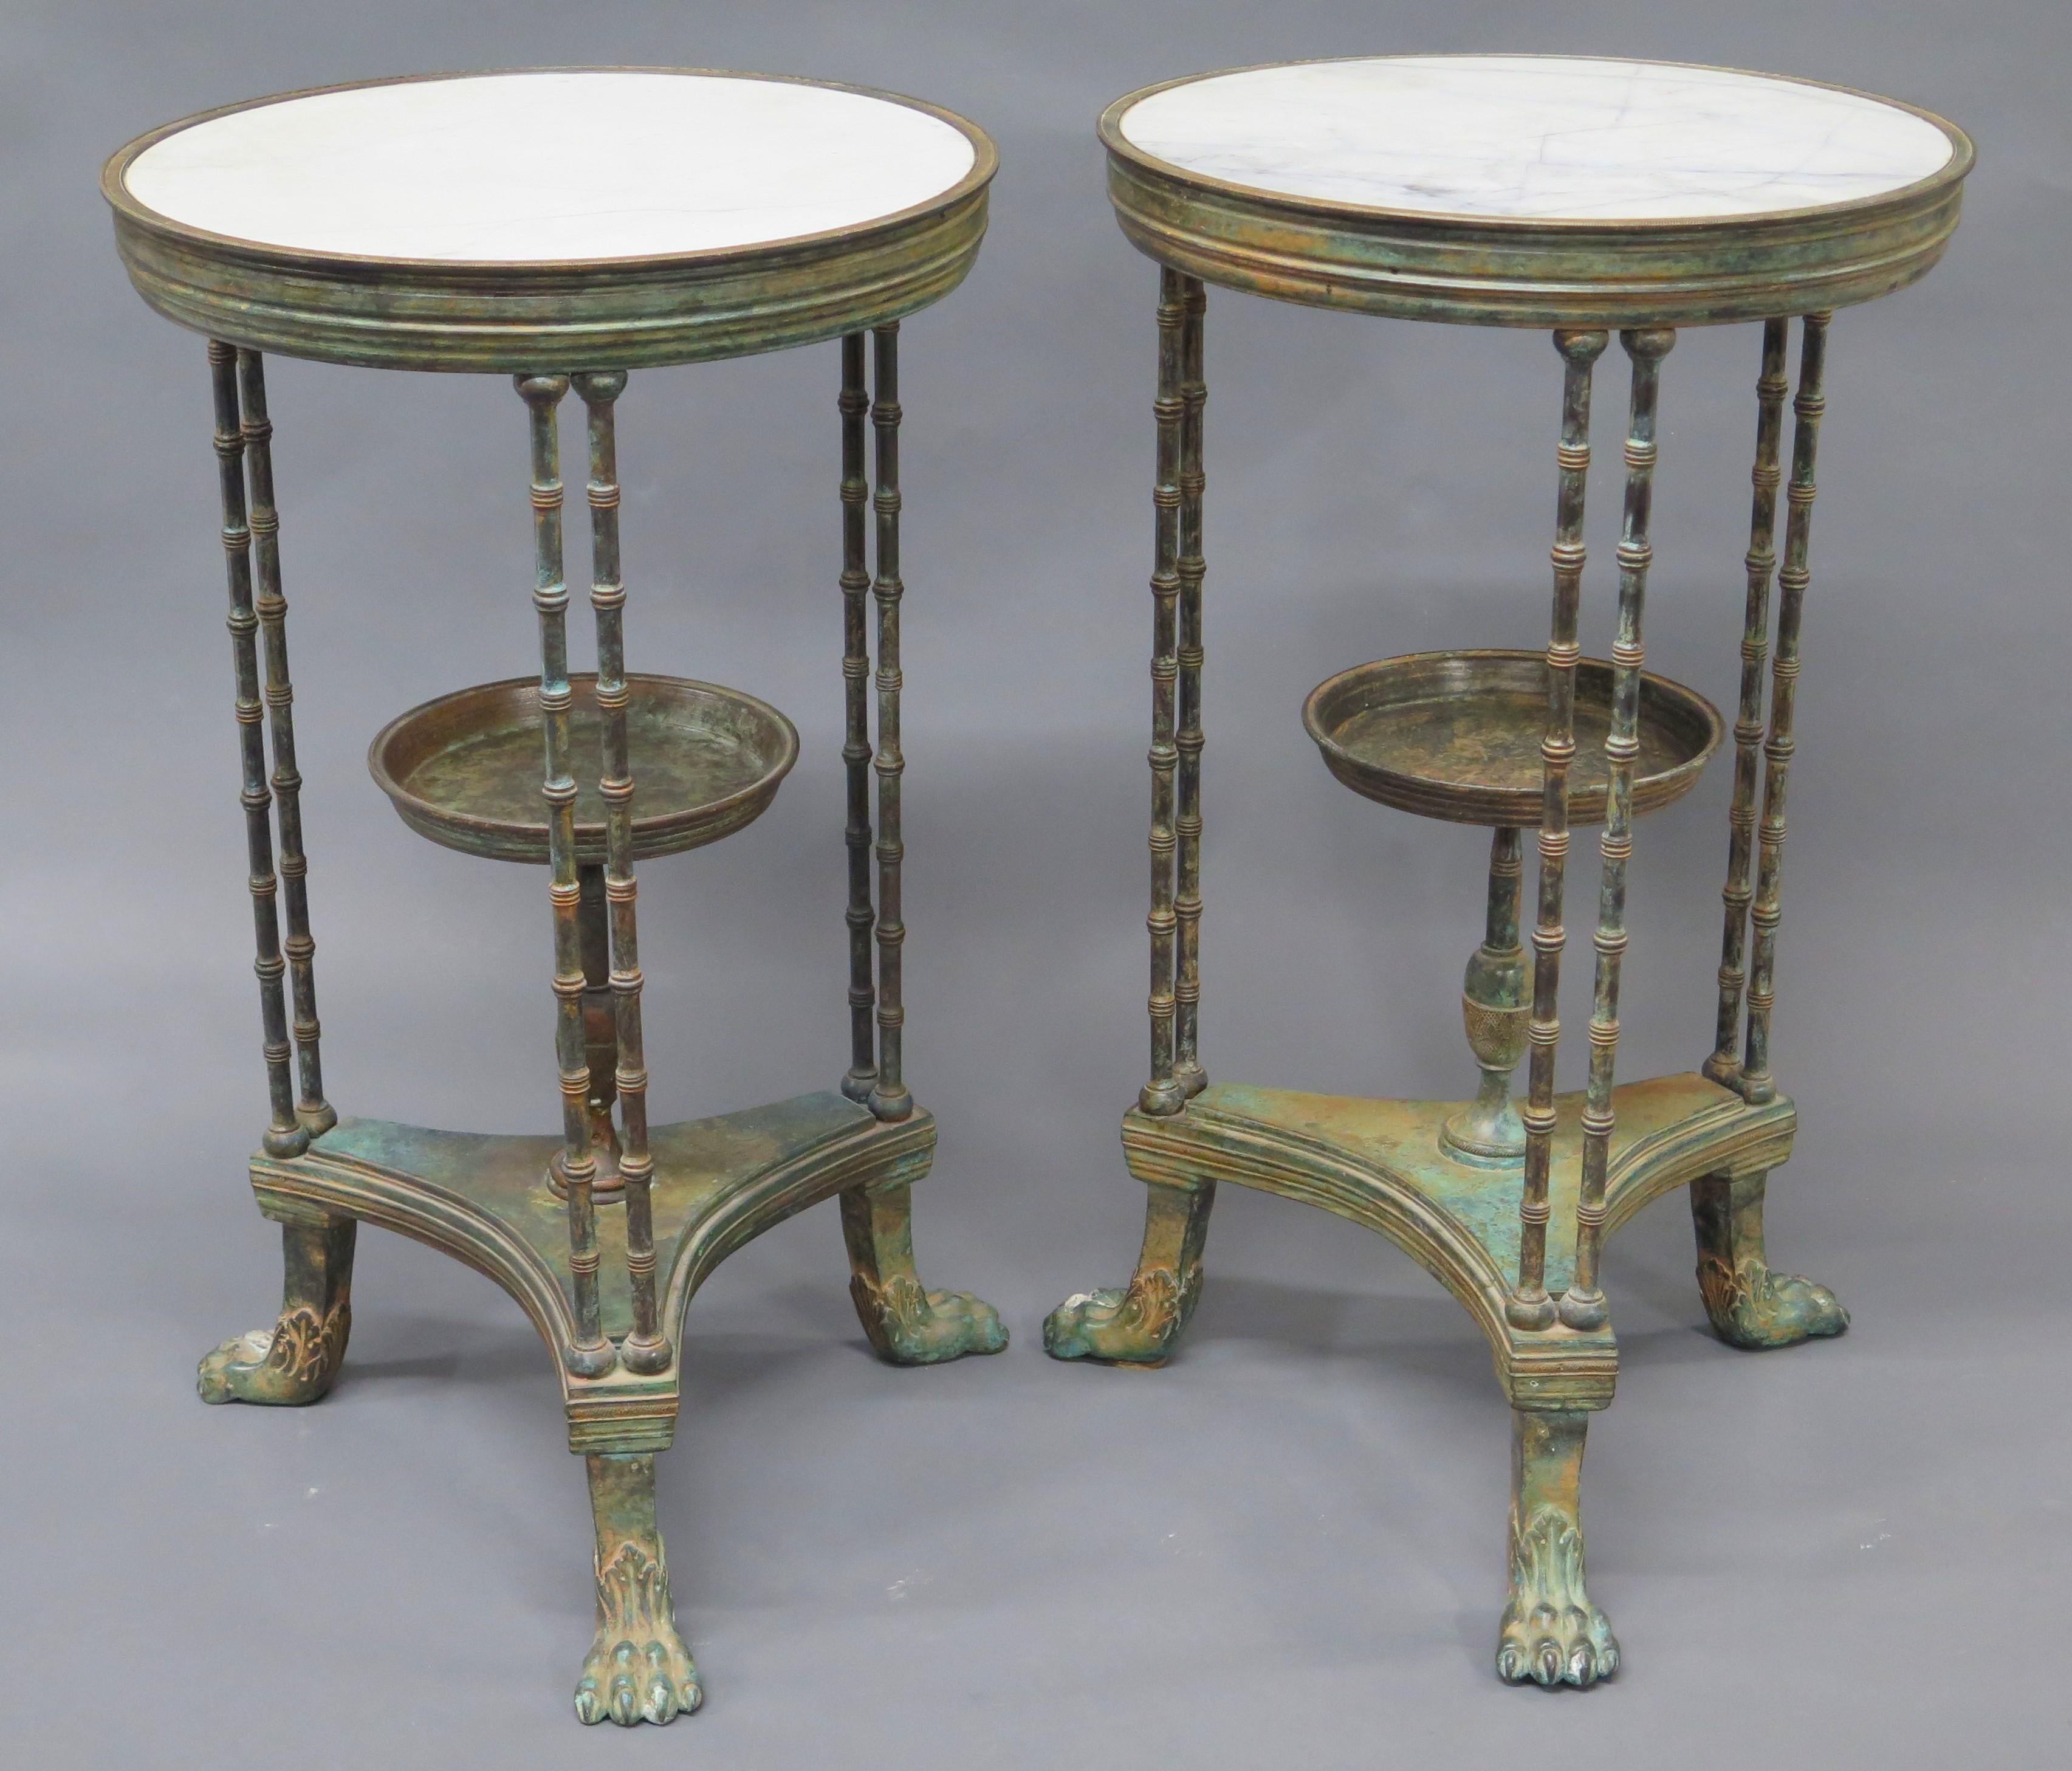 pair of Louis XVI-style patinated bronze gueridons having urn under table top, with carrara (white) marble tops, round table with tripartite base having lion's paw feet, three slender pairs of bamboo form legs support the table top, late 19th /